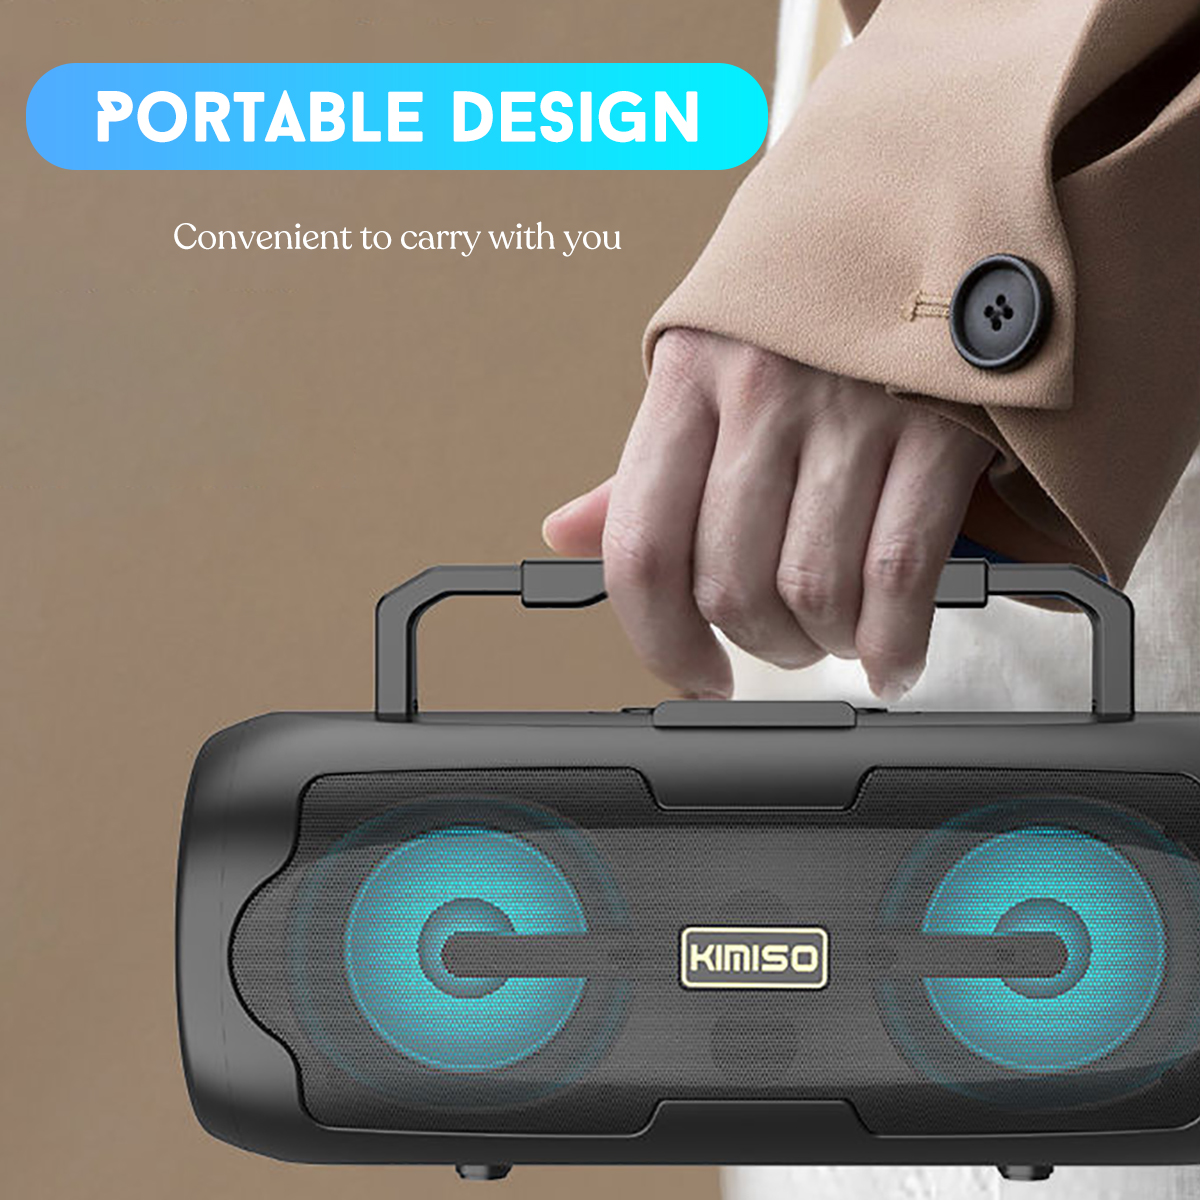 10W-Wireless-bluetooth-Speaker-LED-Portable-Amplifier-Subwoofer-Boombox-FM-Radio-TF-Card-USB-Outdoor-1931993-4